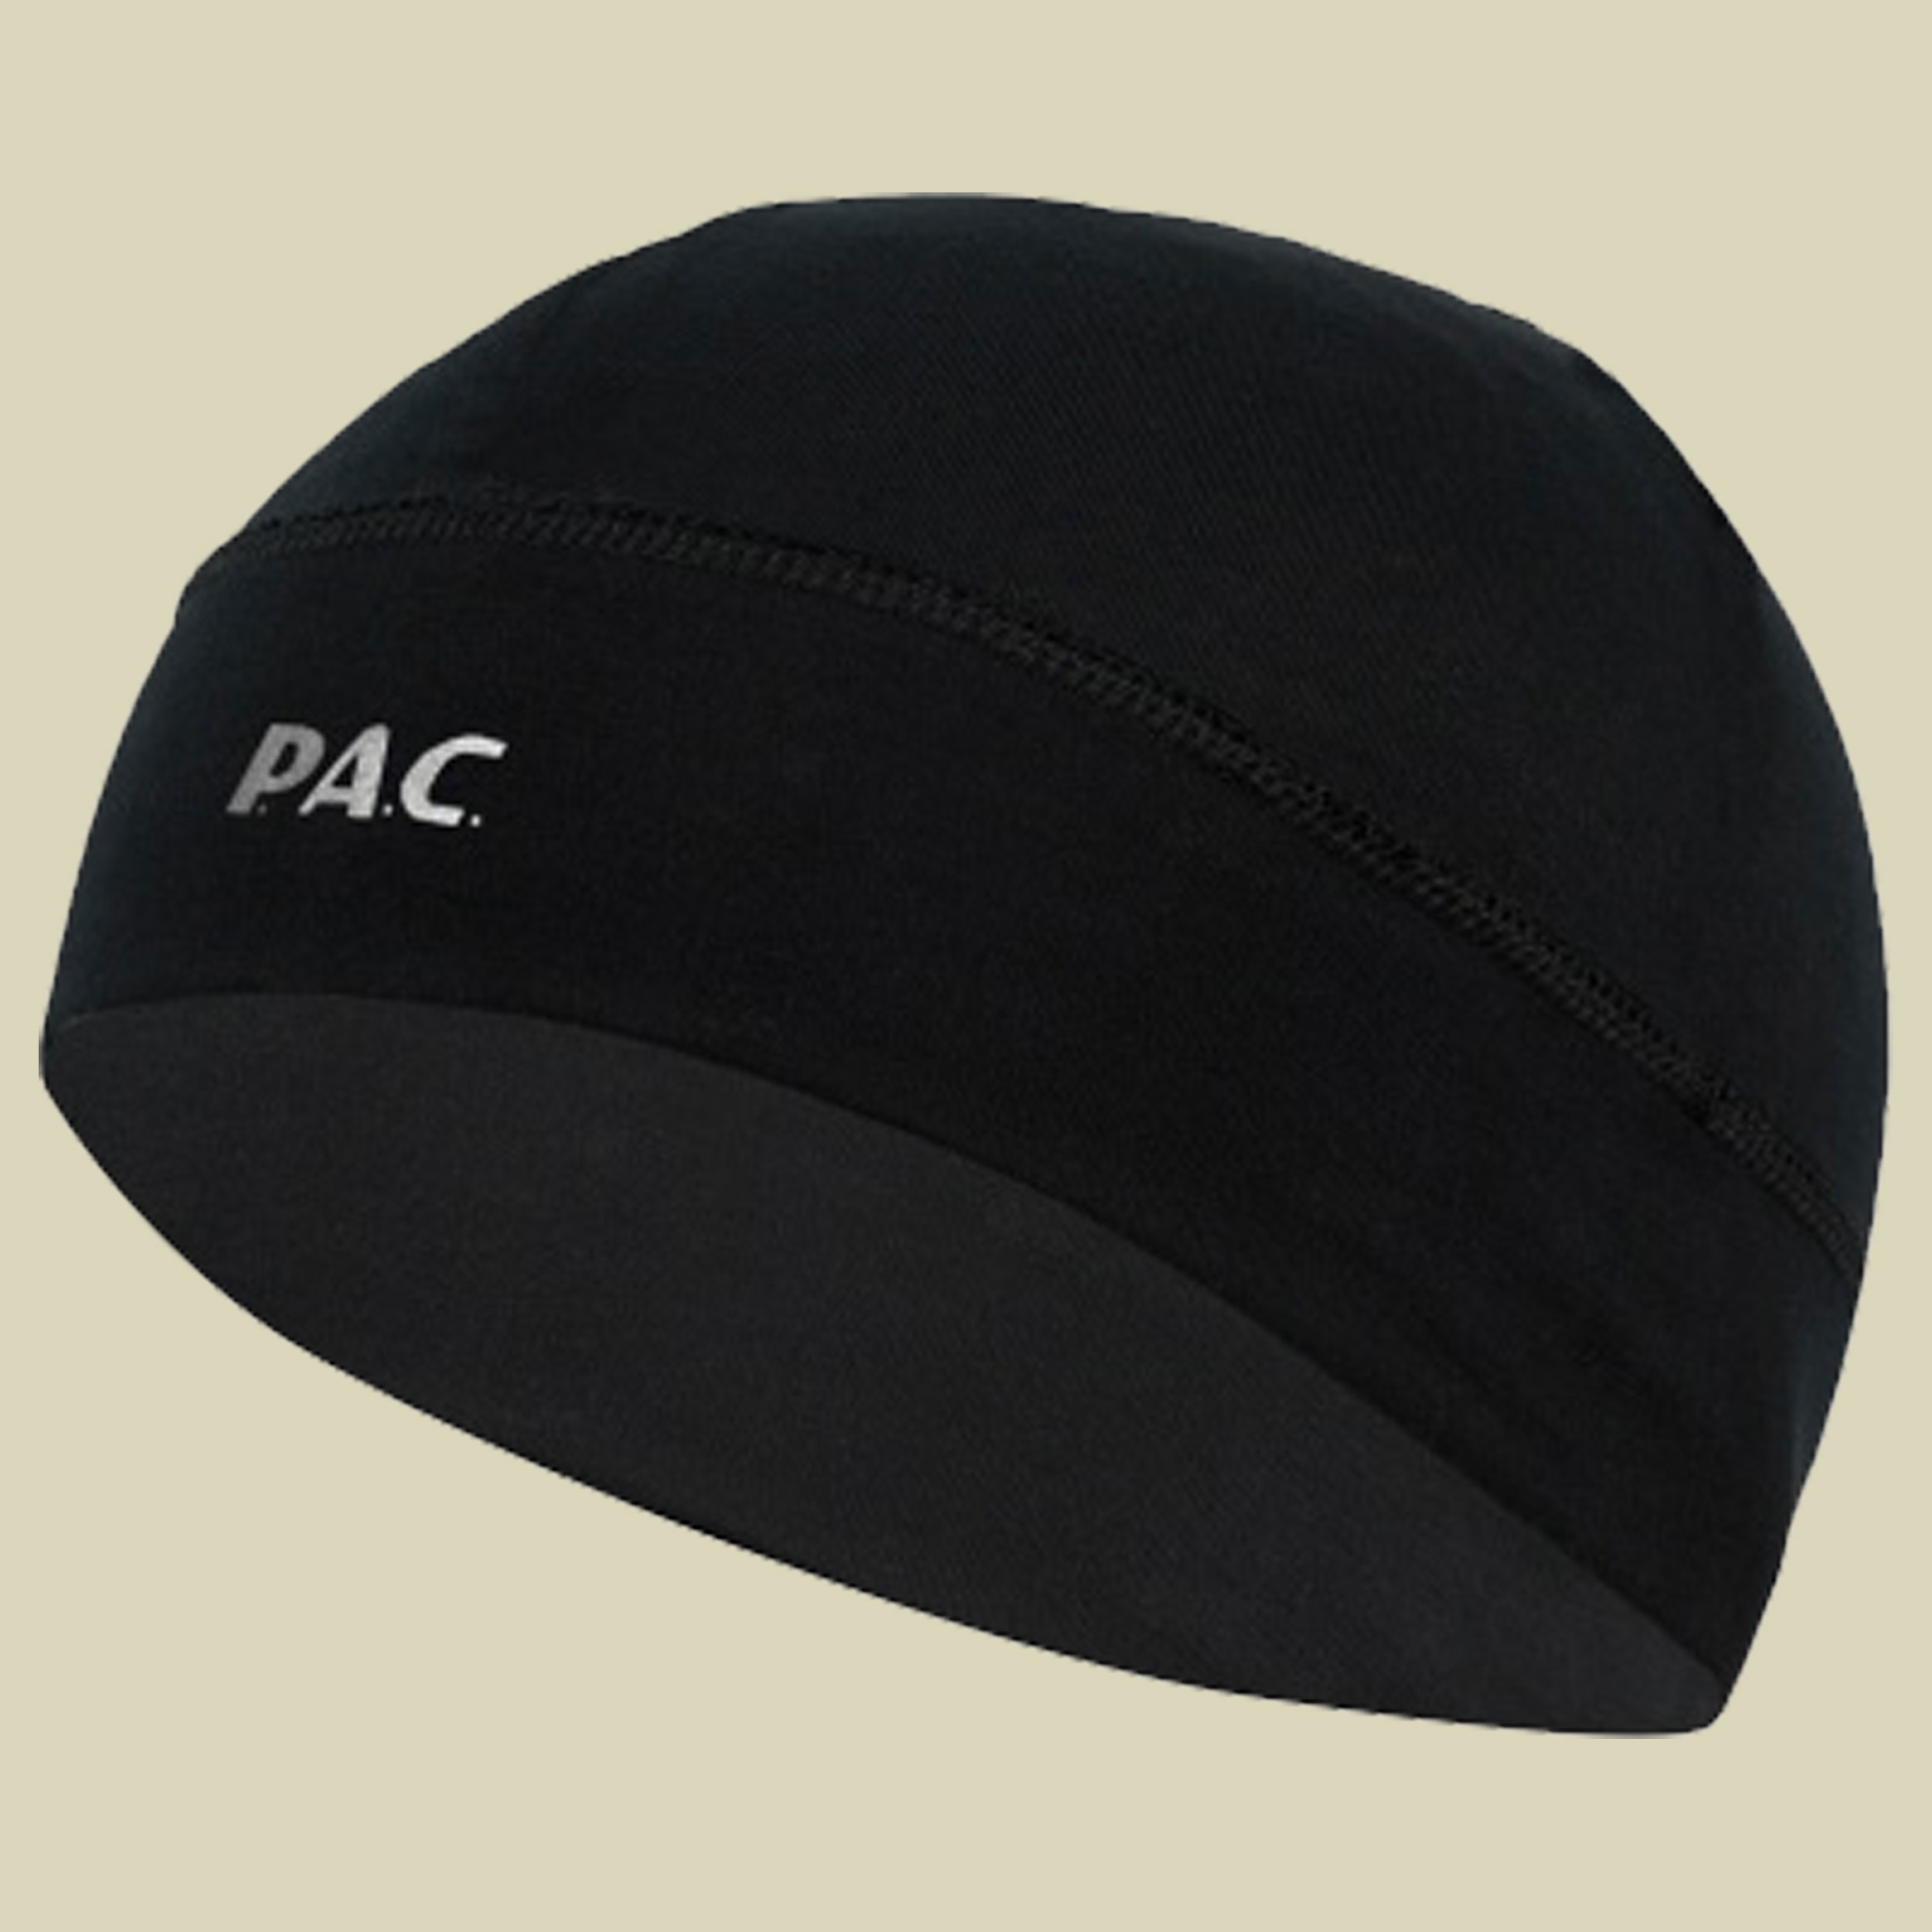 P.A.C. Ocean Upcycling Hat